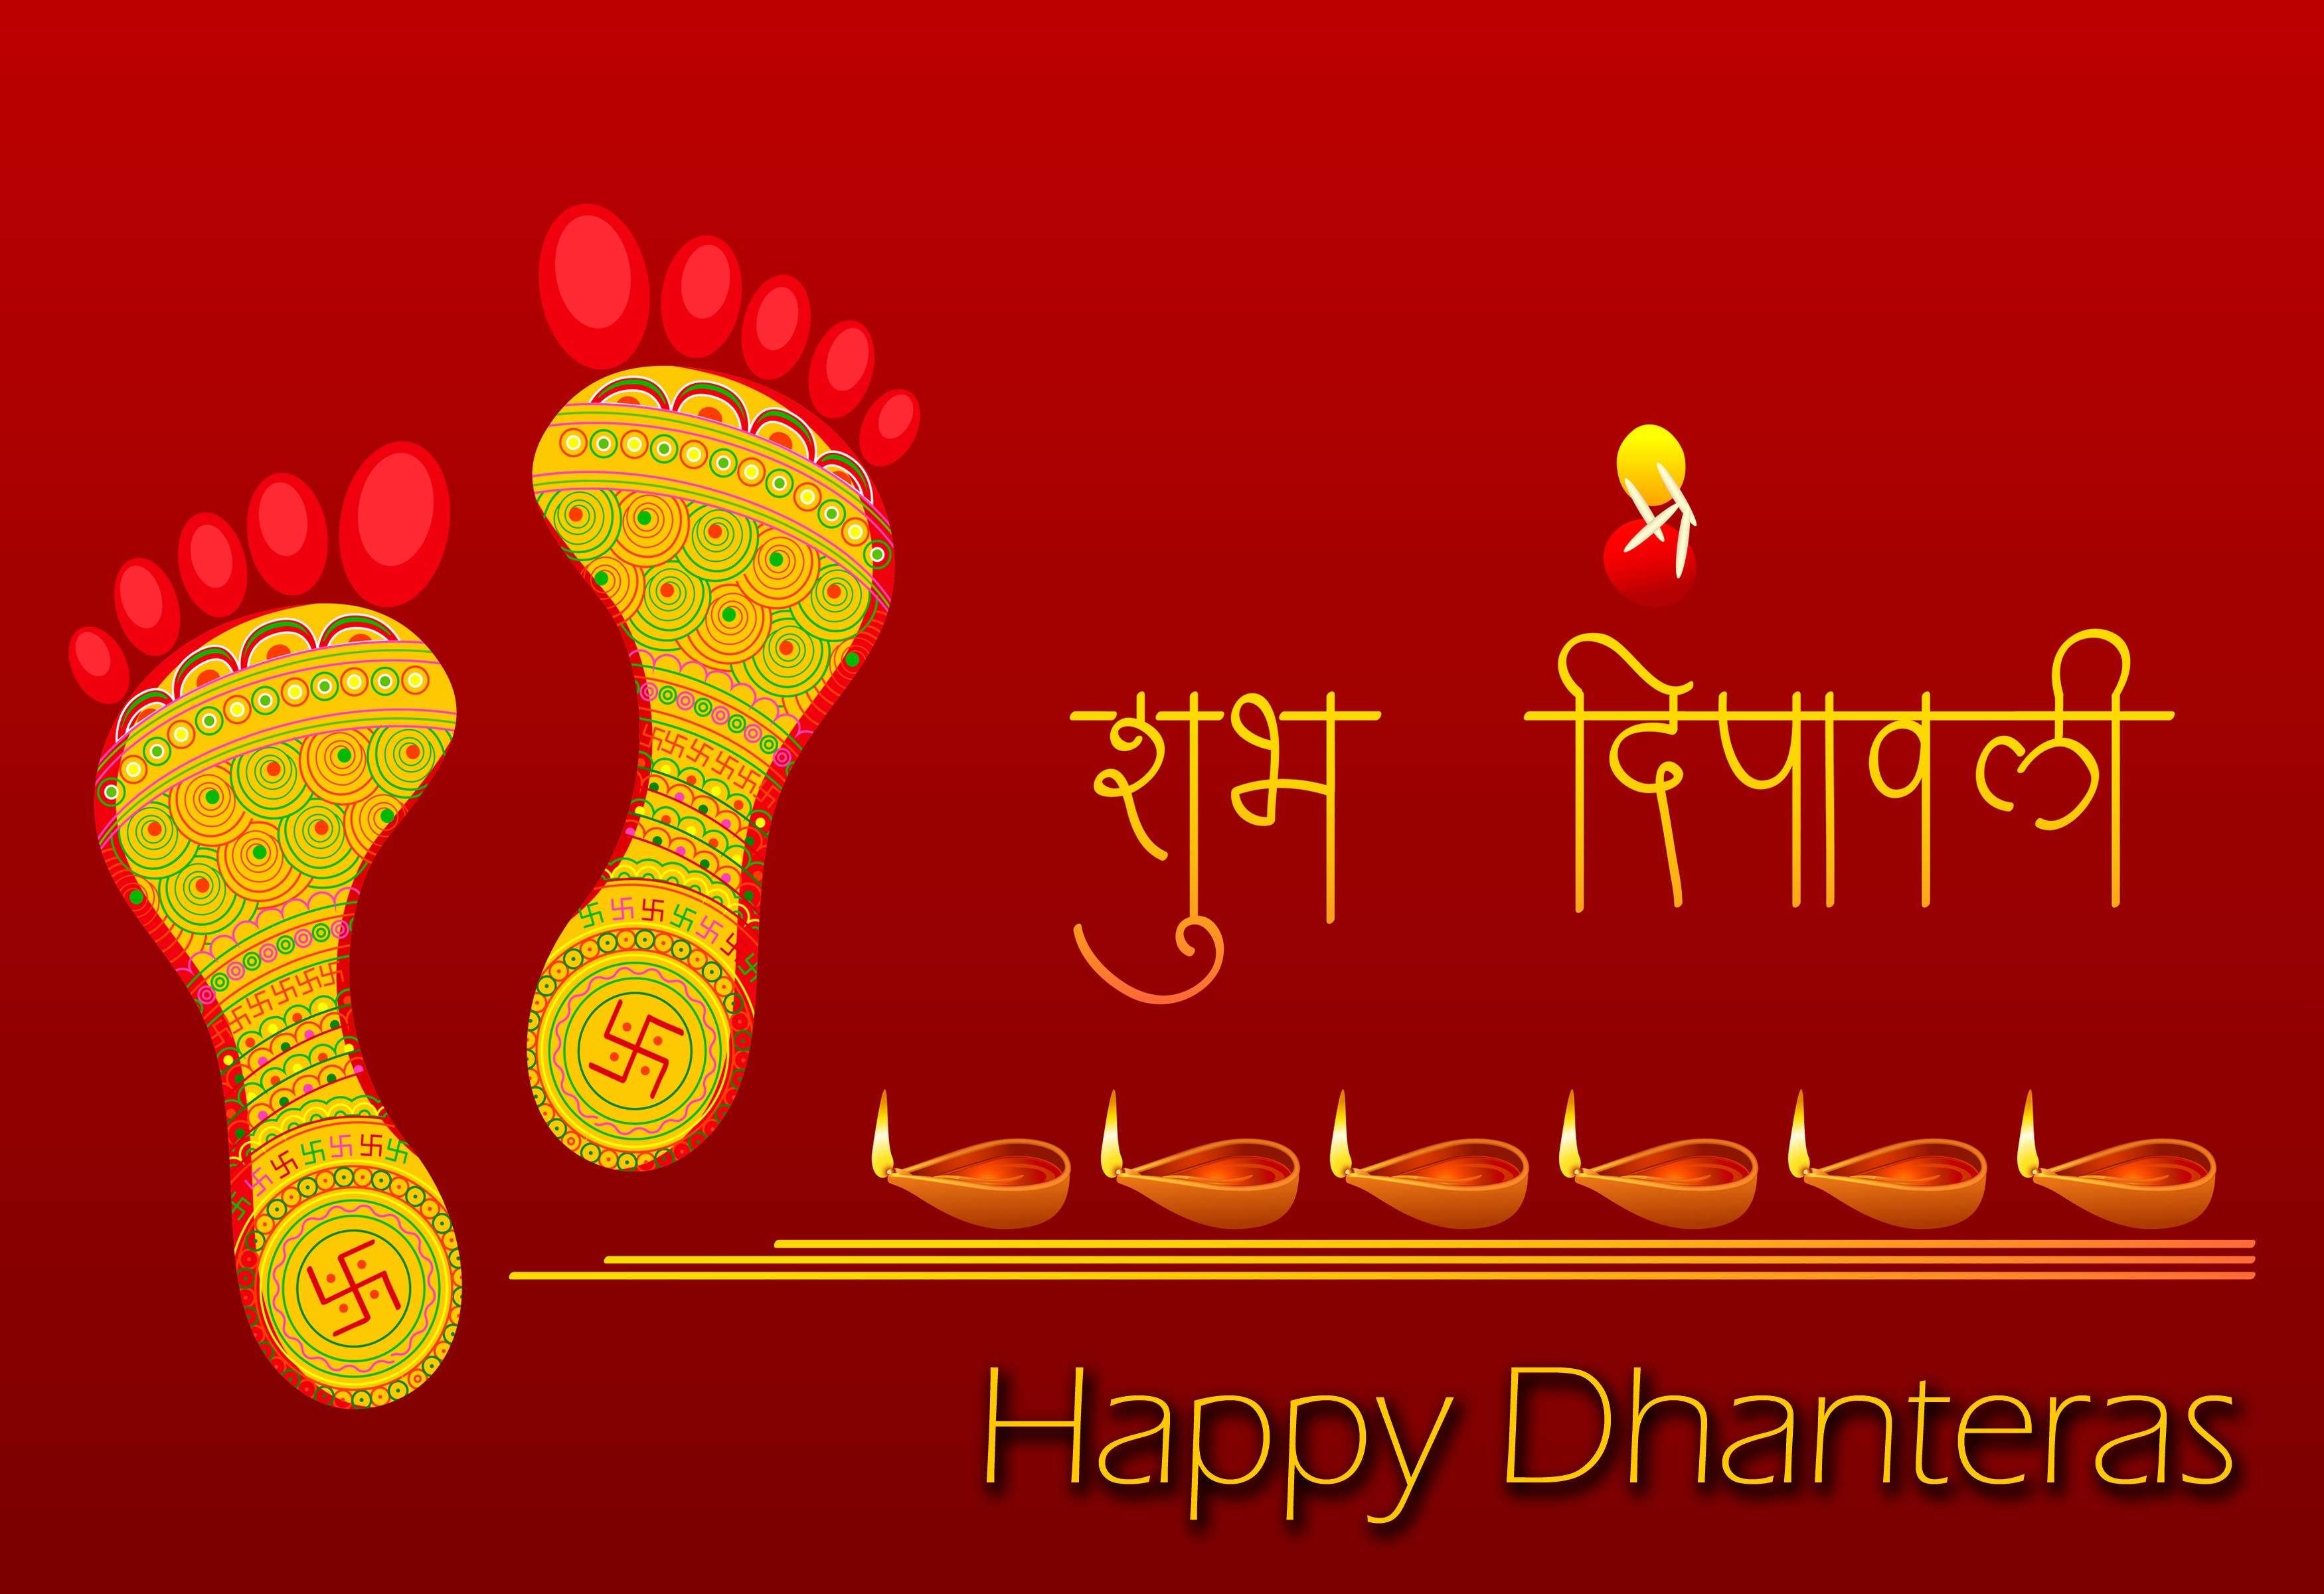 Happy Dhanteras And Diwali Wishes - 3500x2400 Wallpaper 